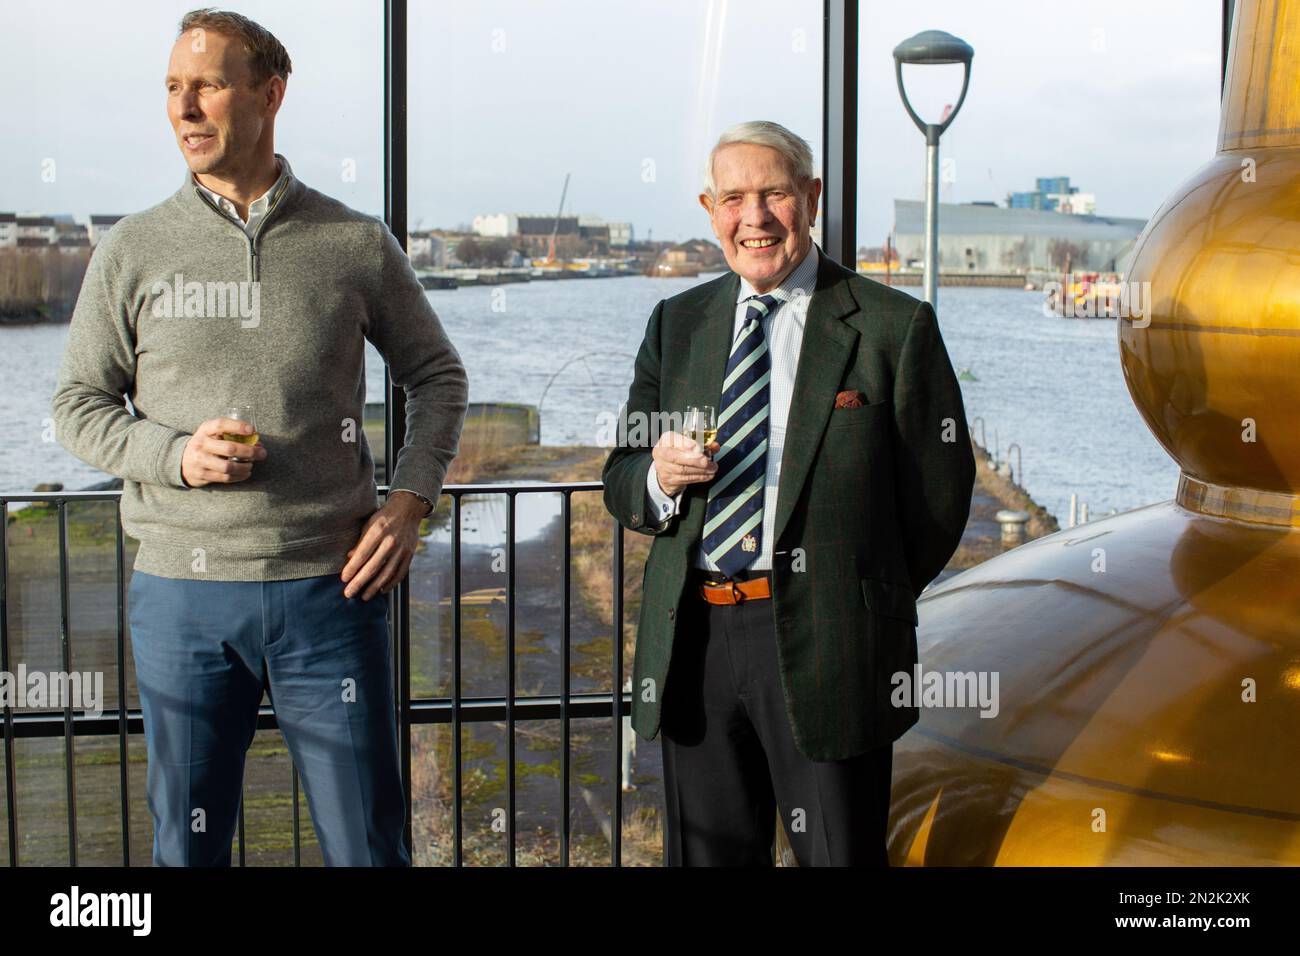 Tim Morrisonn and his son Andrew Morrison at Clydeside distillery in Glasgow, Scotland Stock Photo